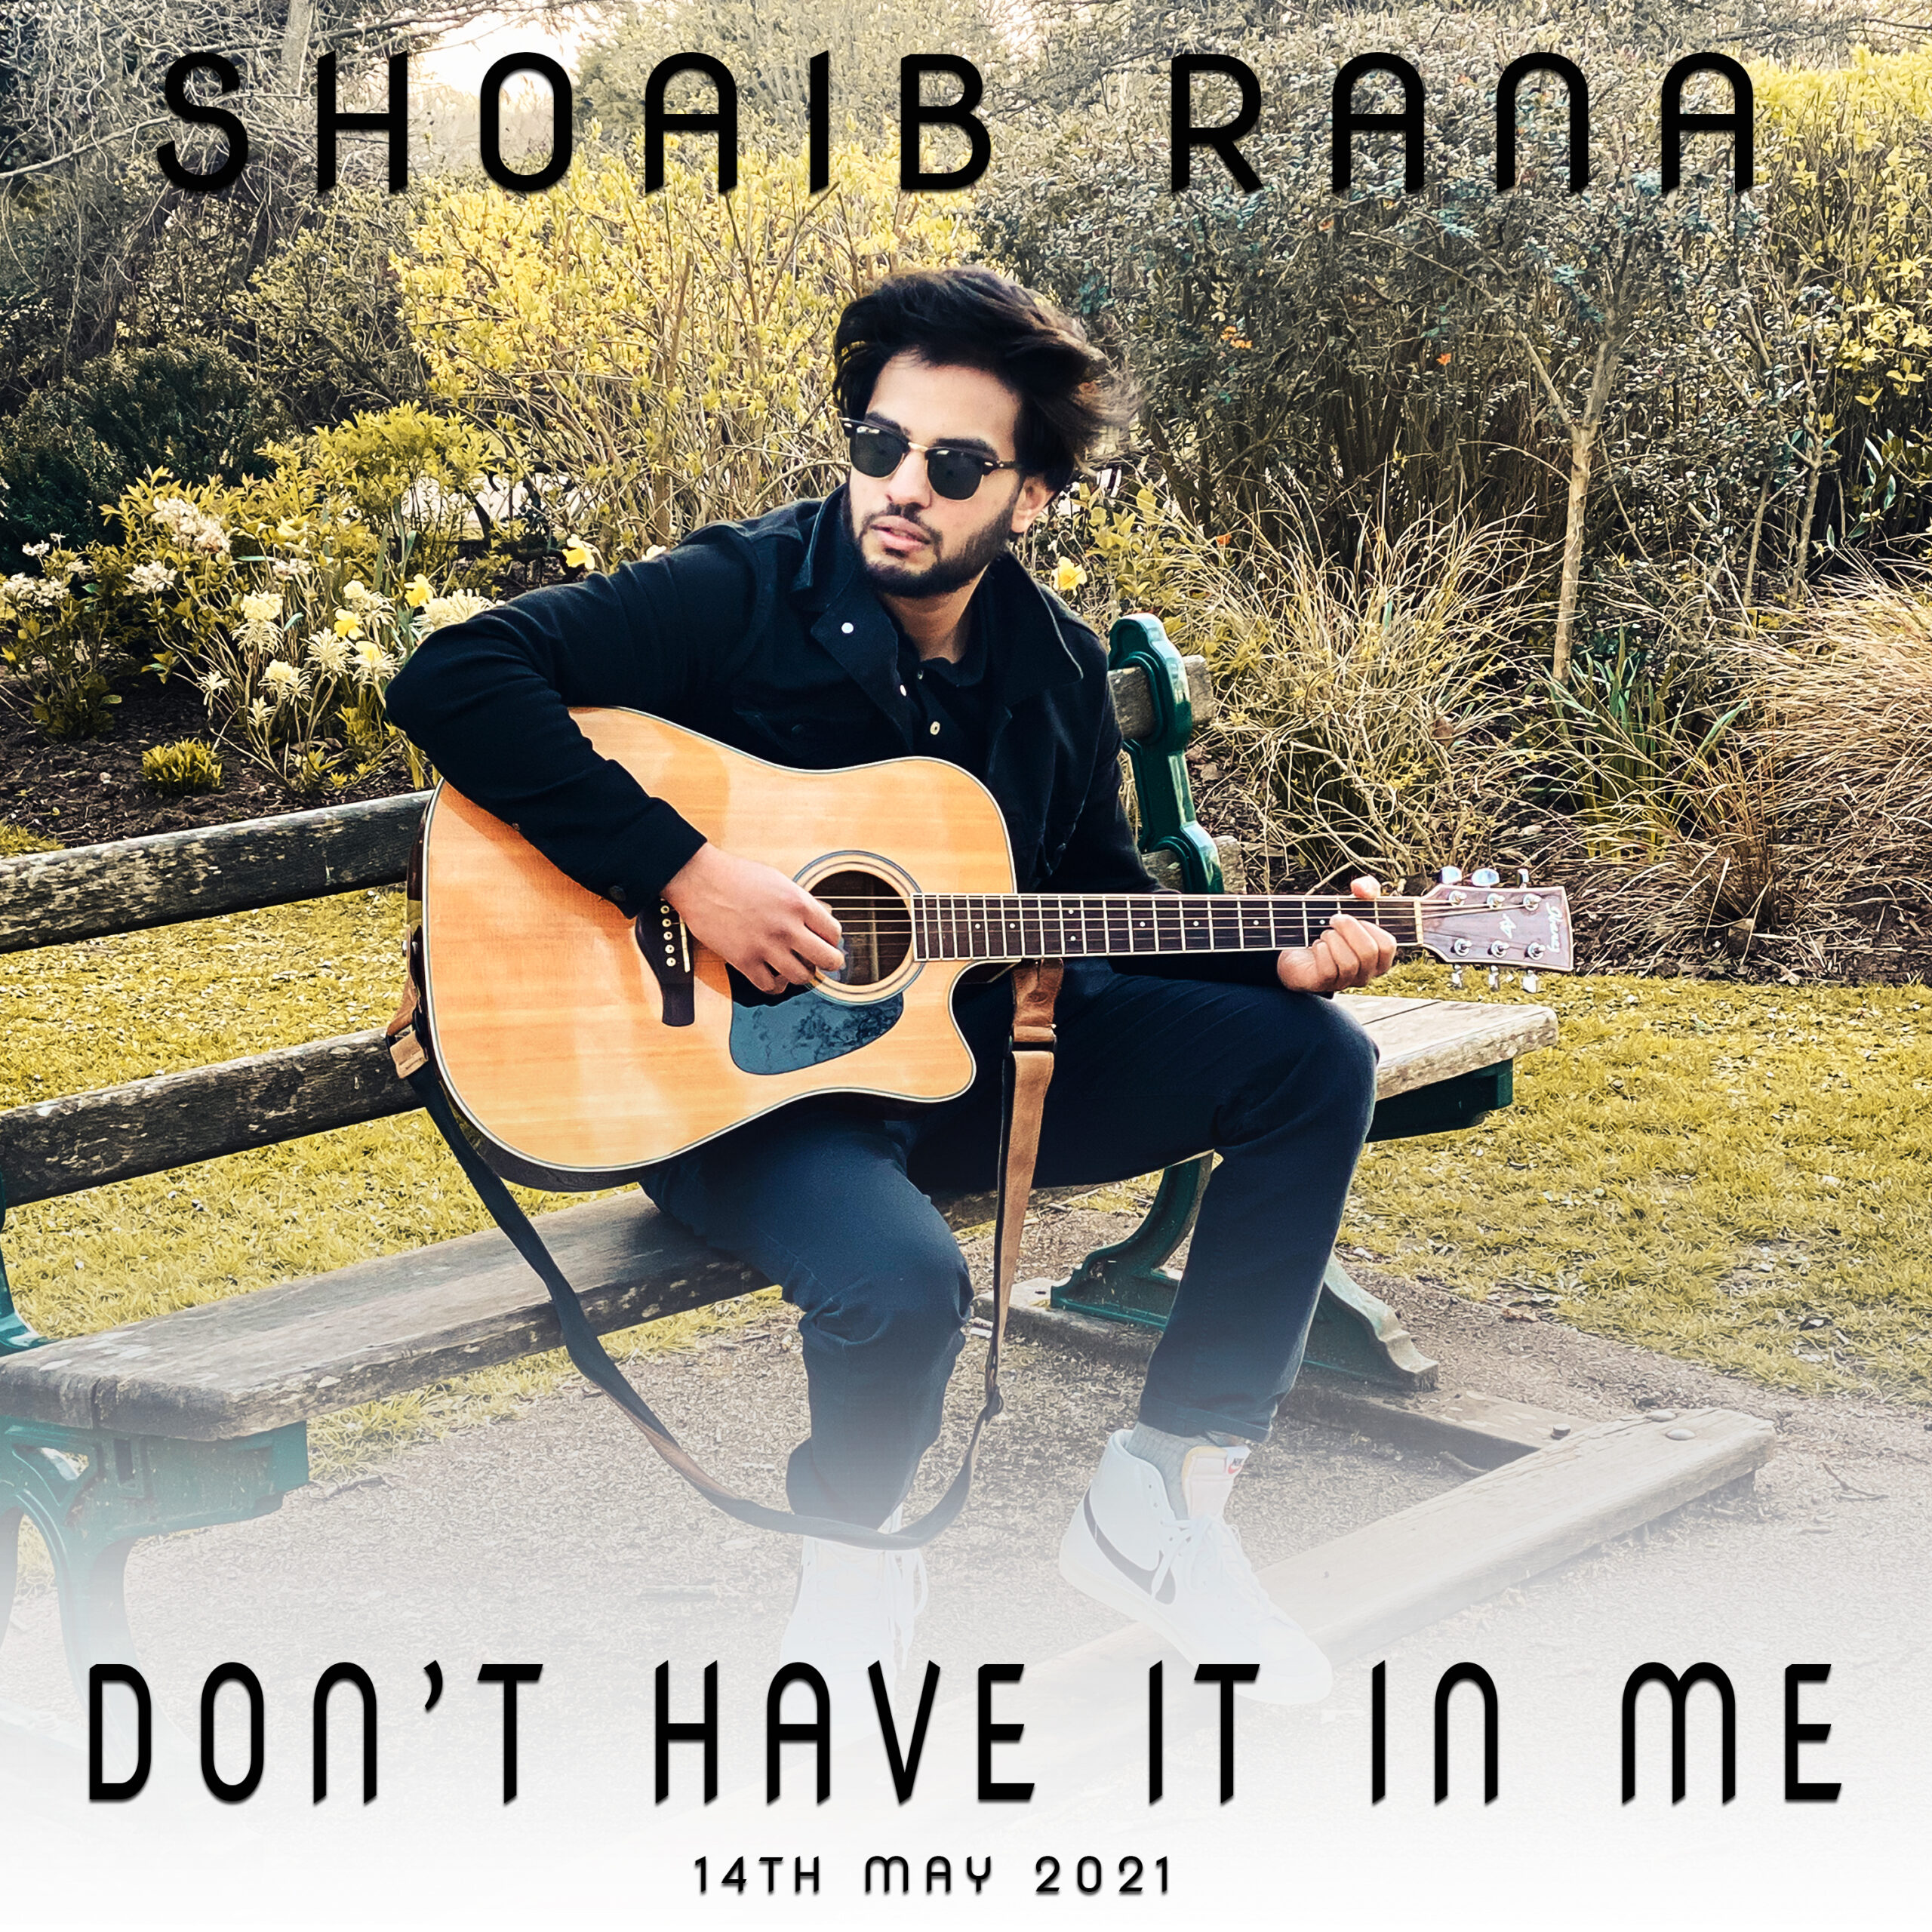 Shoaib Don't Have It In Me 14th May